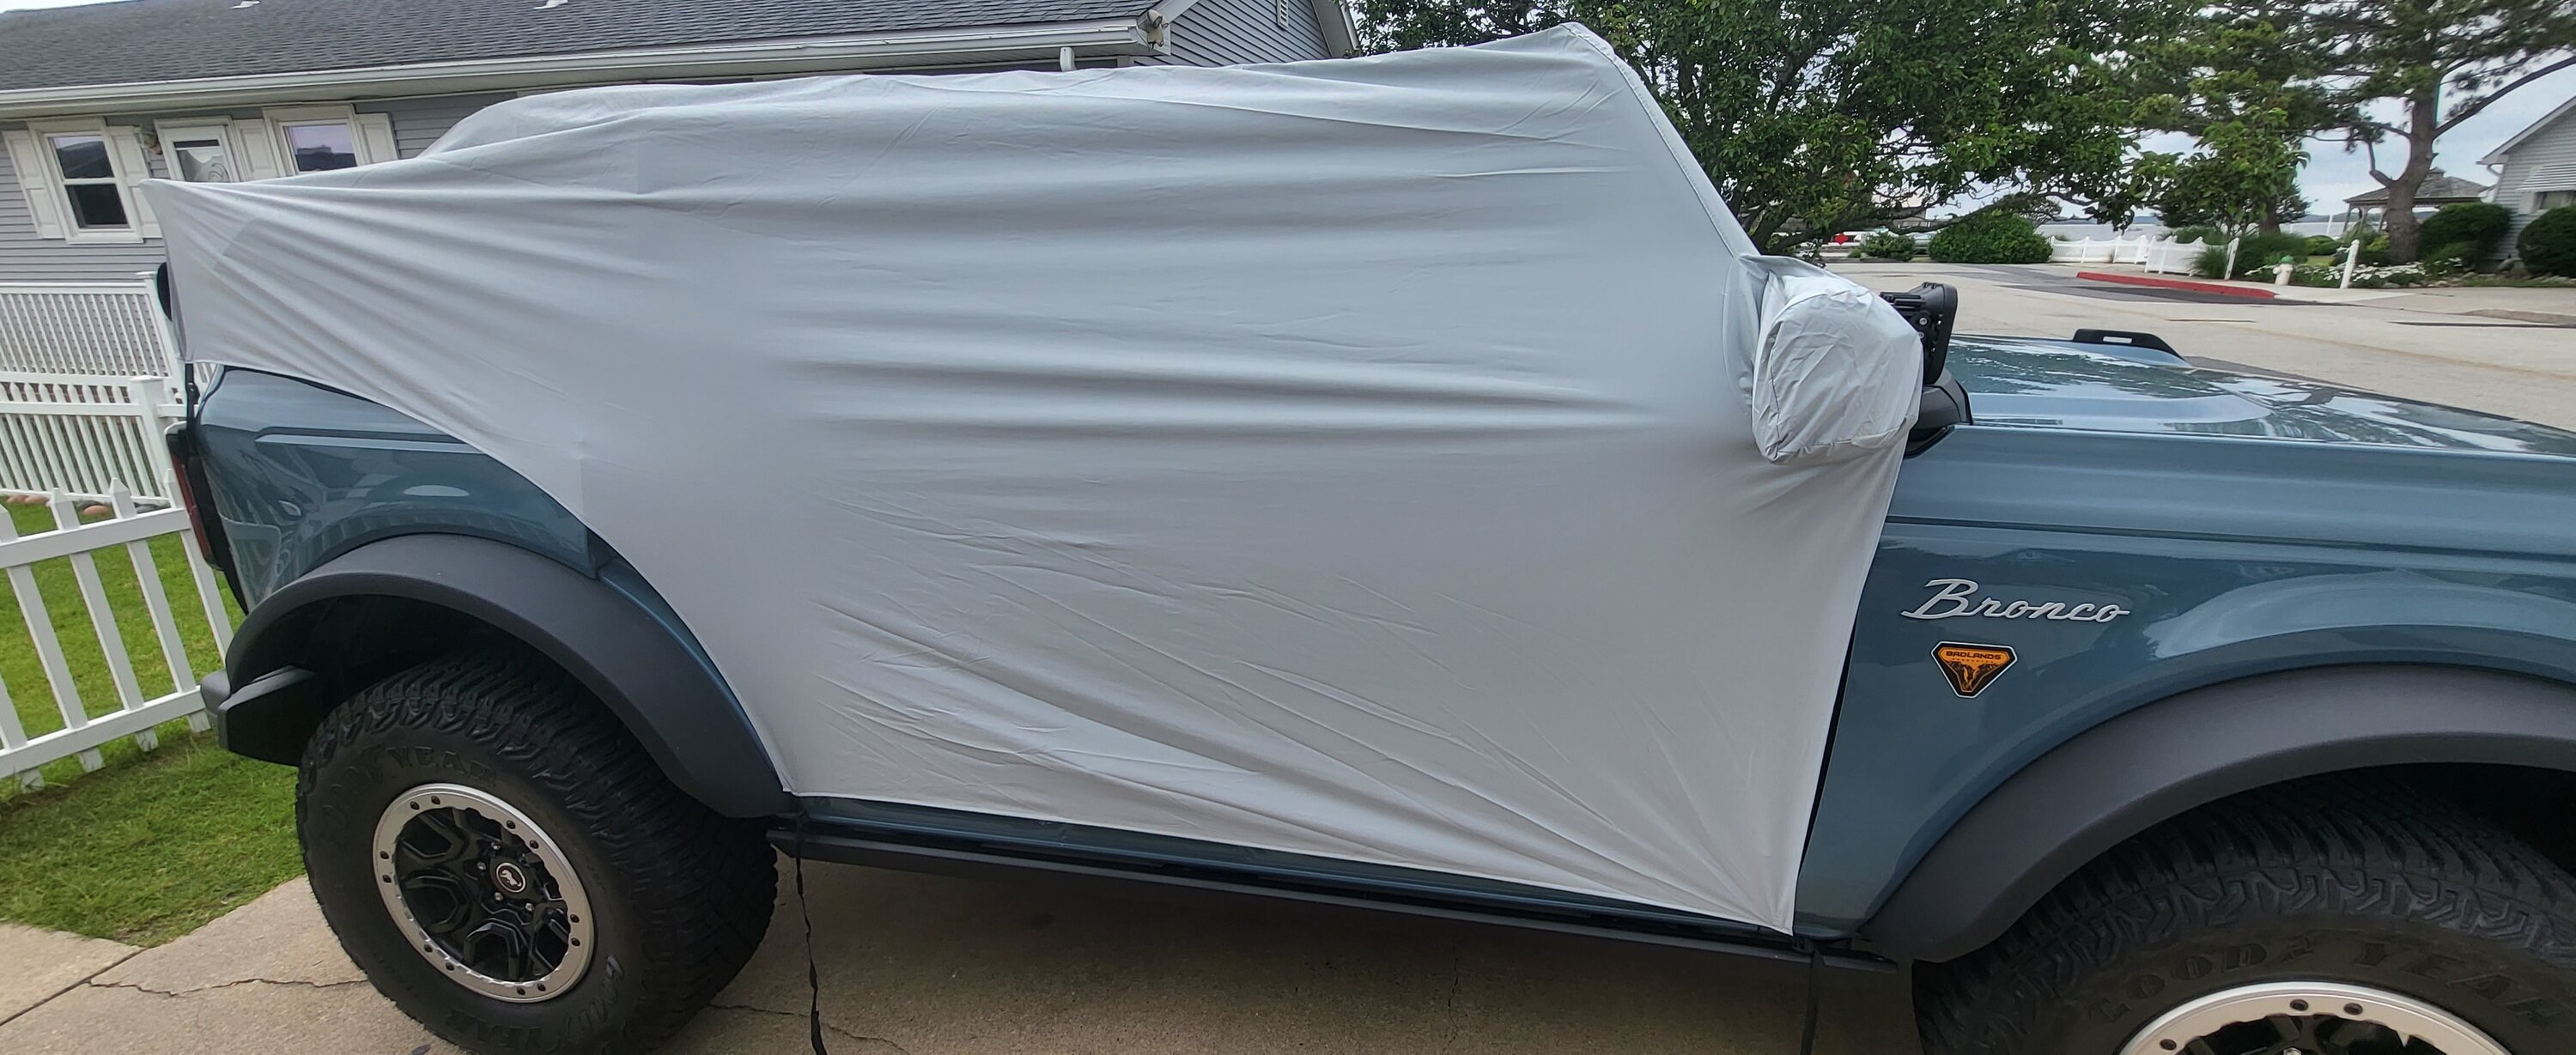 Ford Bronco FORD Cockpit Cover review(Spoiler its Useless) 20220703_095518